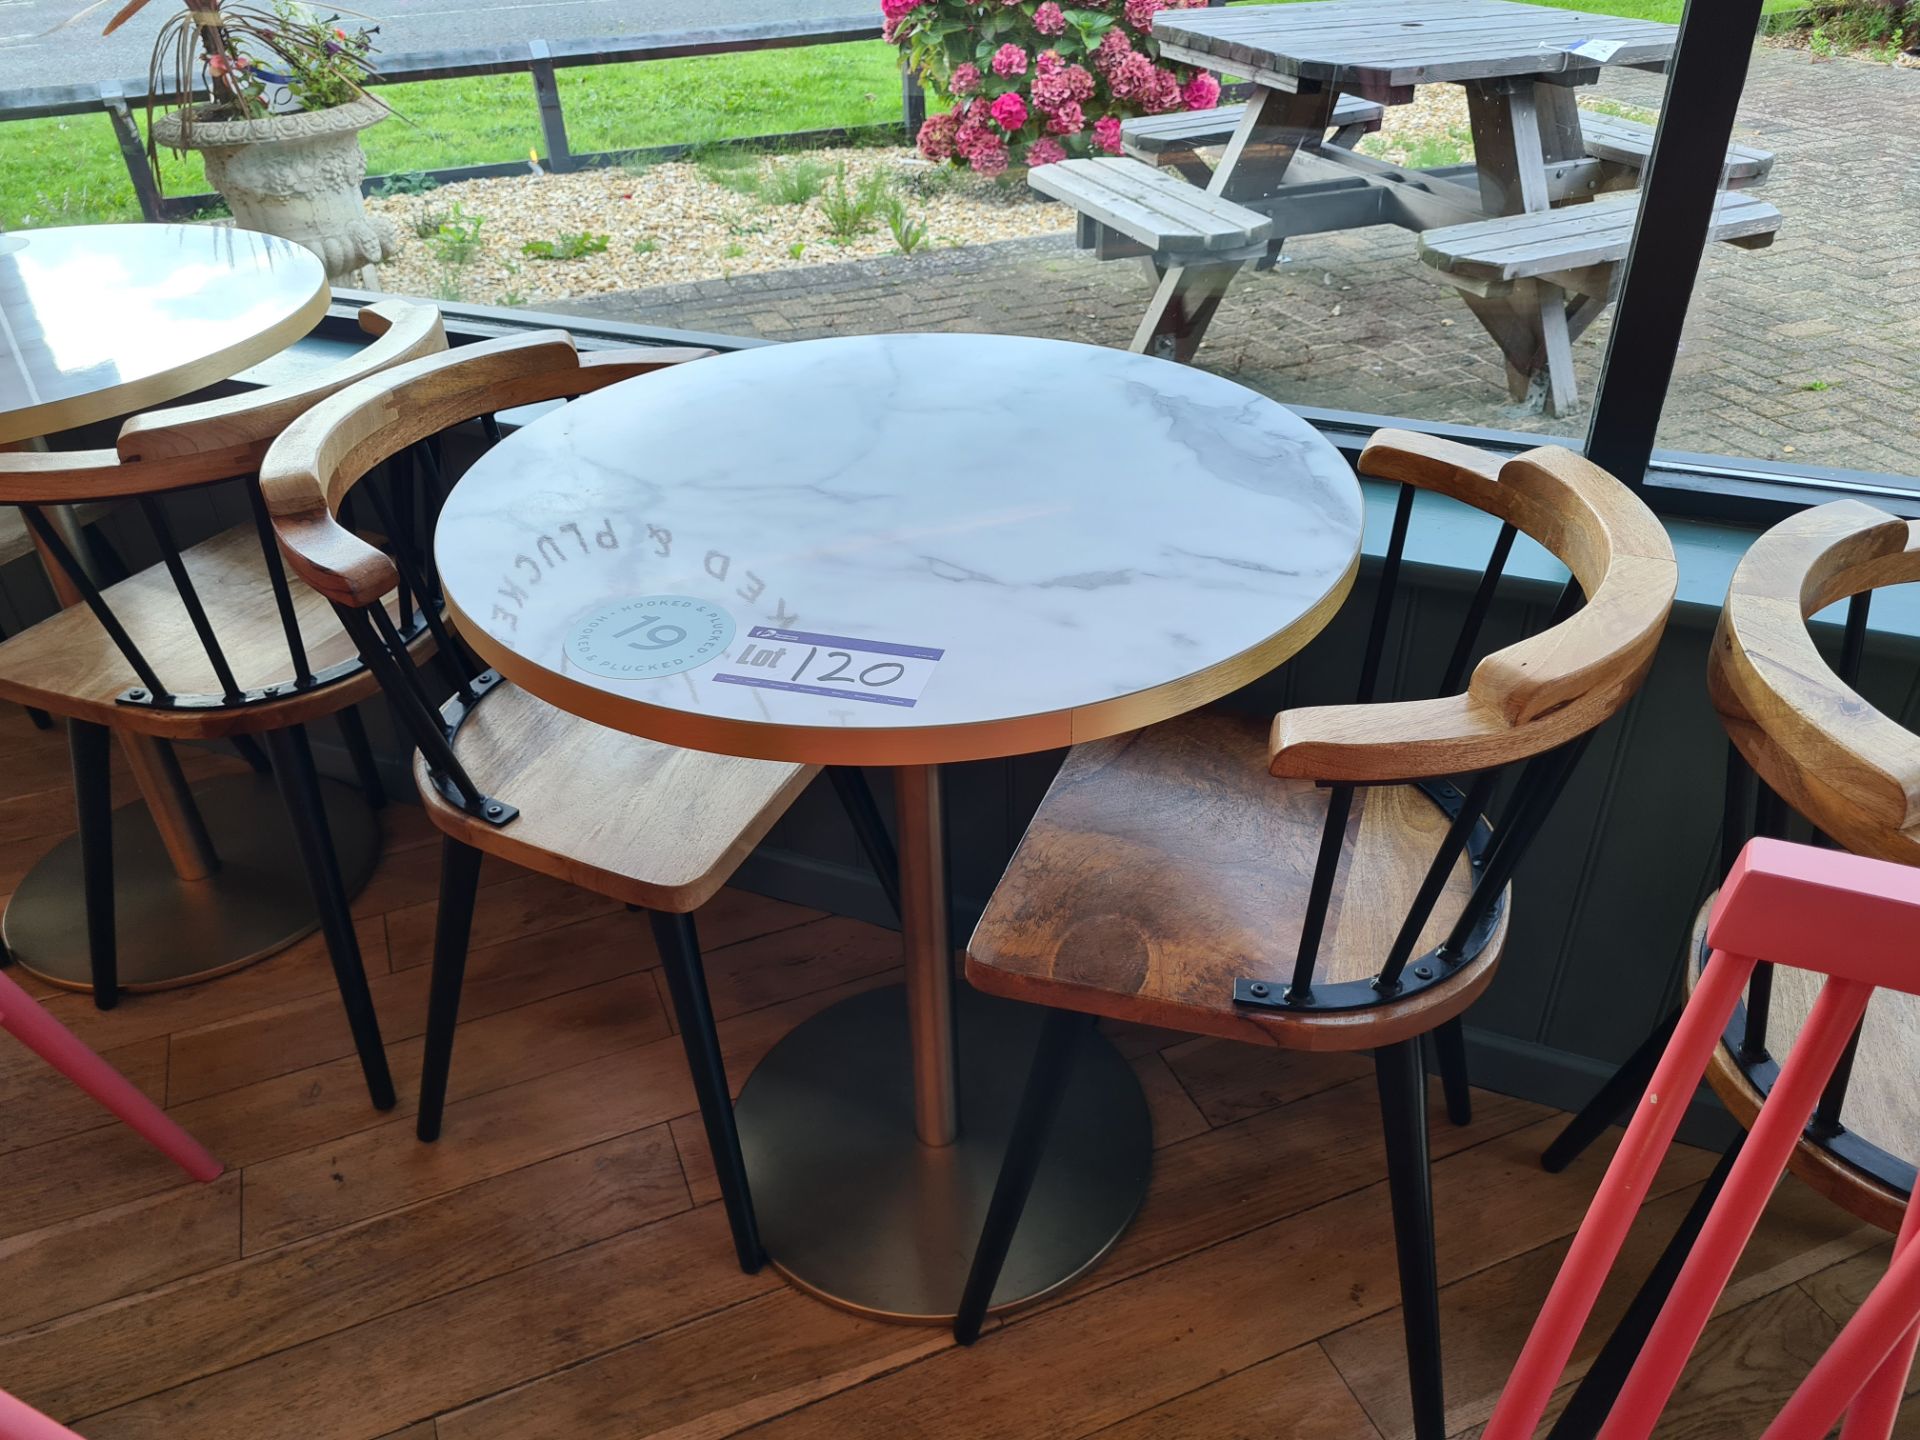 Circular Marble Effect Table, Approx. 0.7m Diameter x 0.75m Tall and Two Metal/Wooden Dining Chairs